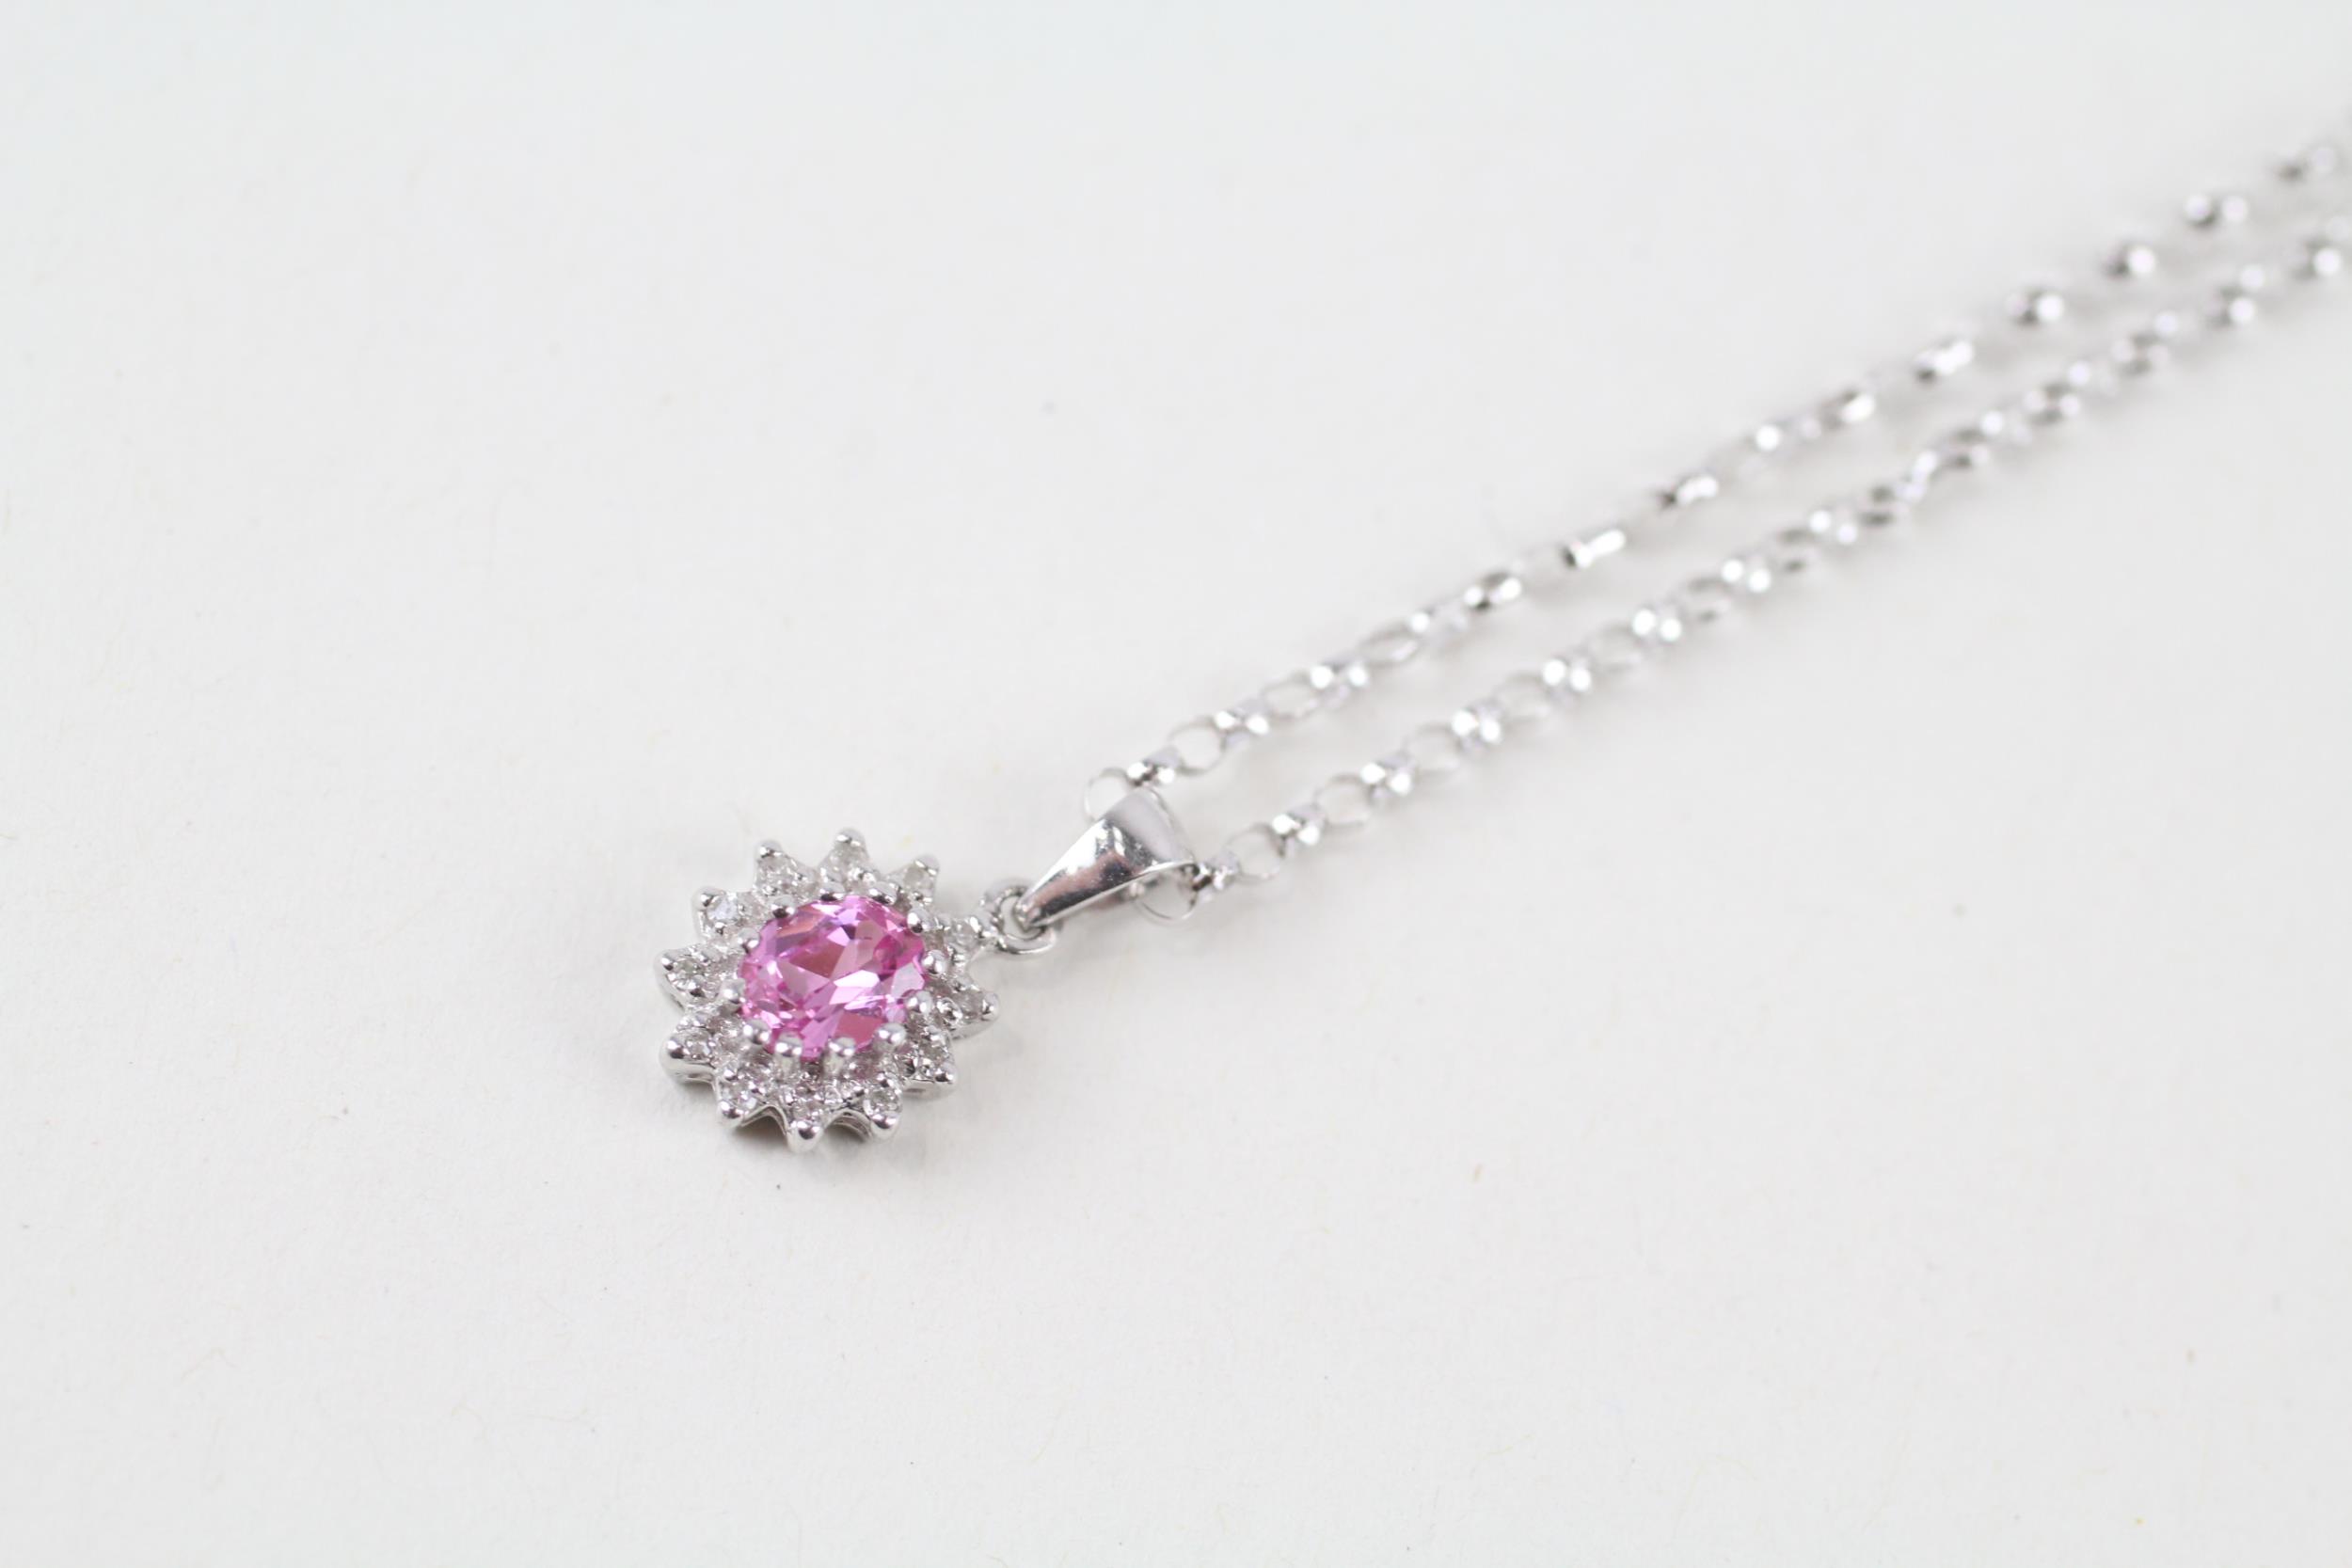 9ct white gold diamond & pink sapphire cluster pendant necklace (1.9g)